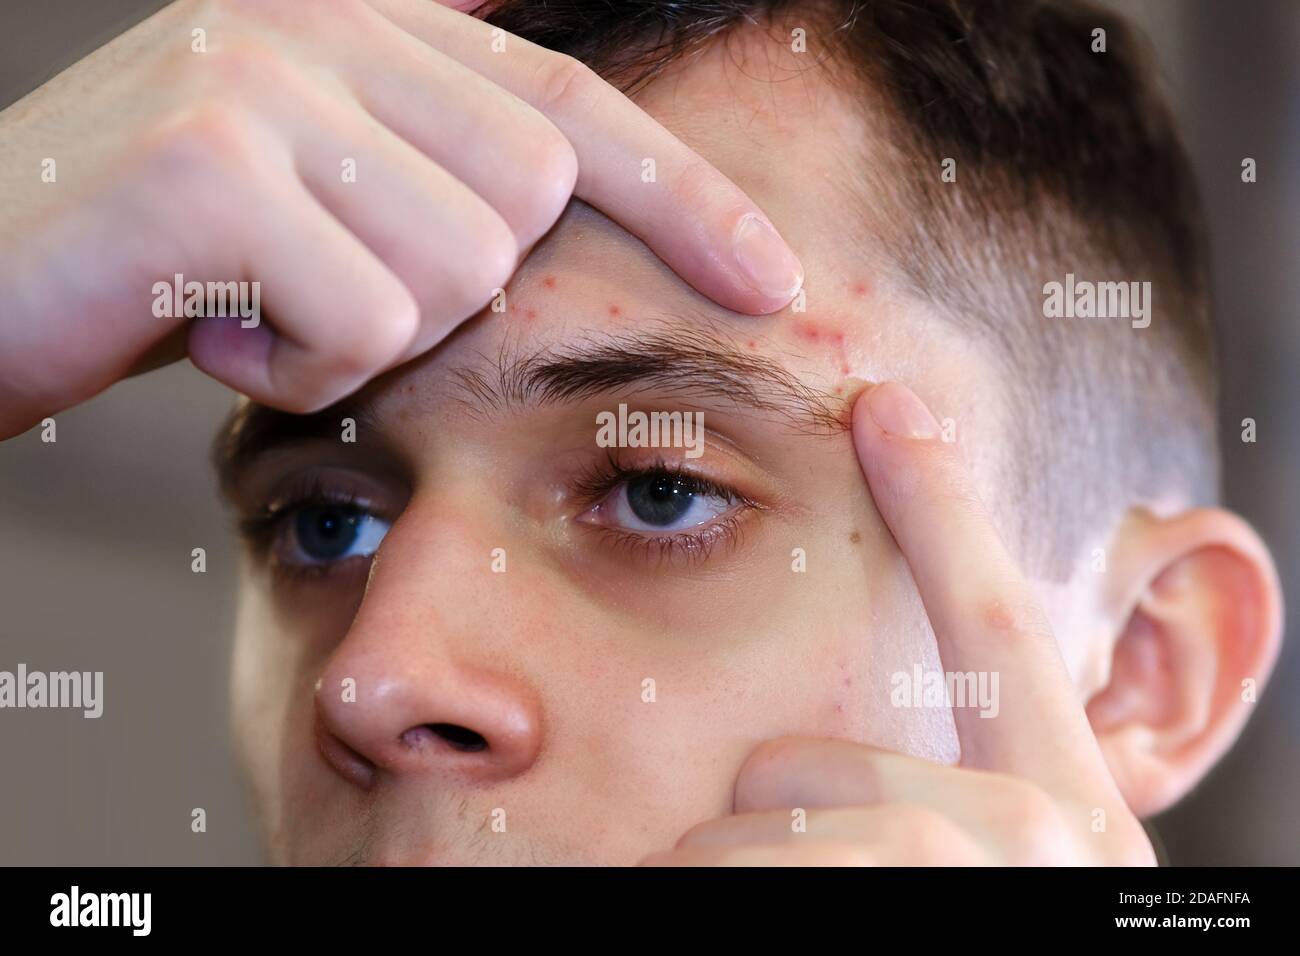 A teenager cleans his face from acne. Profile of a teenager looking at his face in the mirror. Problems with the skin Stock Photo